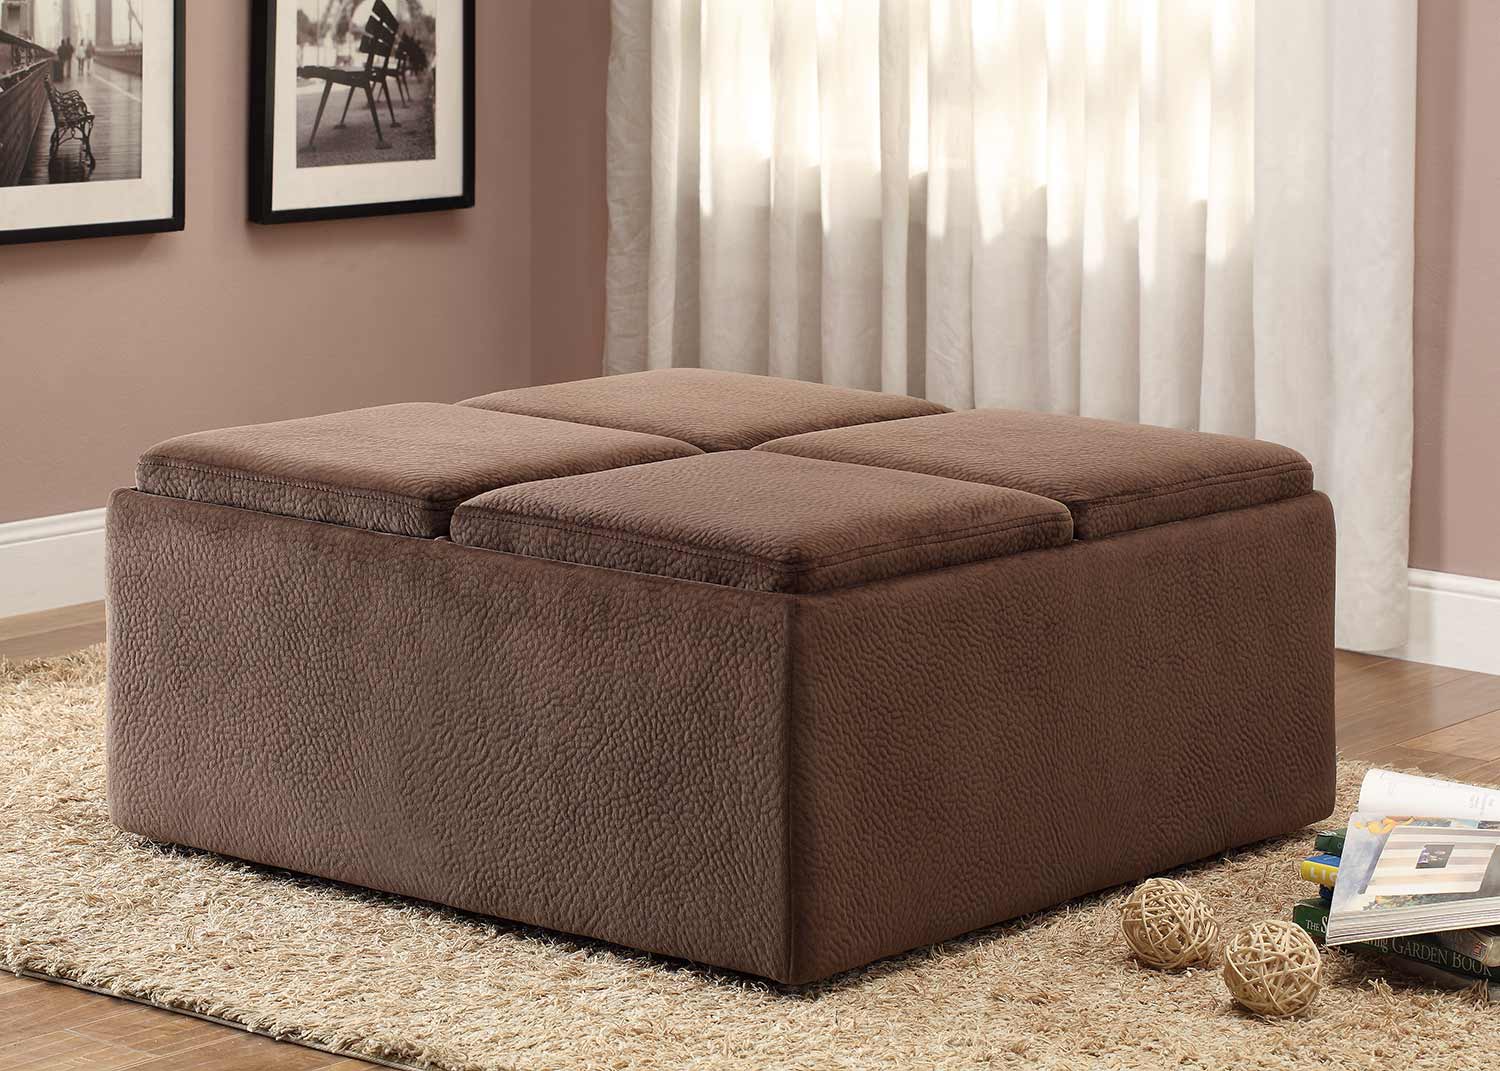 Homelegance Kaitlyn Cocktail/Coffee Ottoman with Casters for Easy Mobility - Chocolate Textured Plush Microfiber